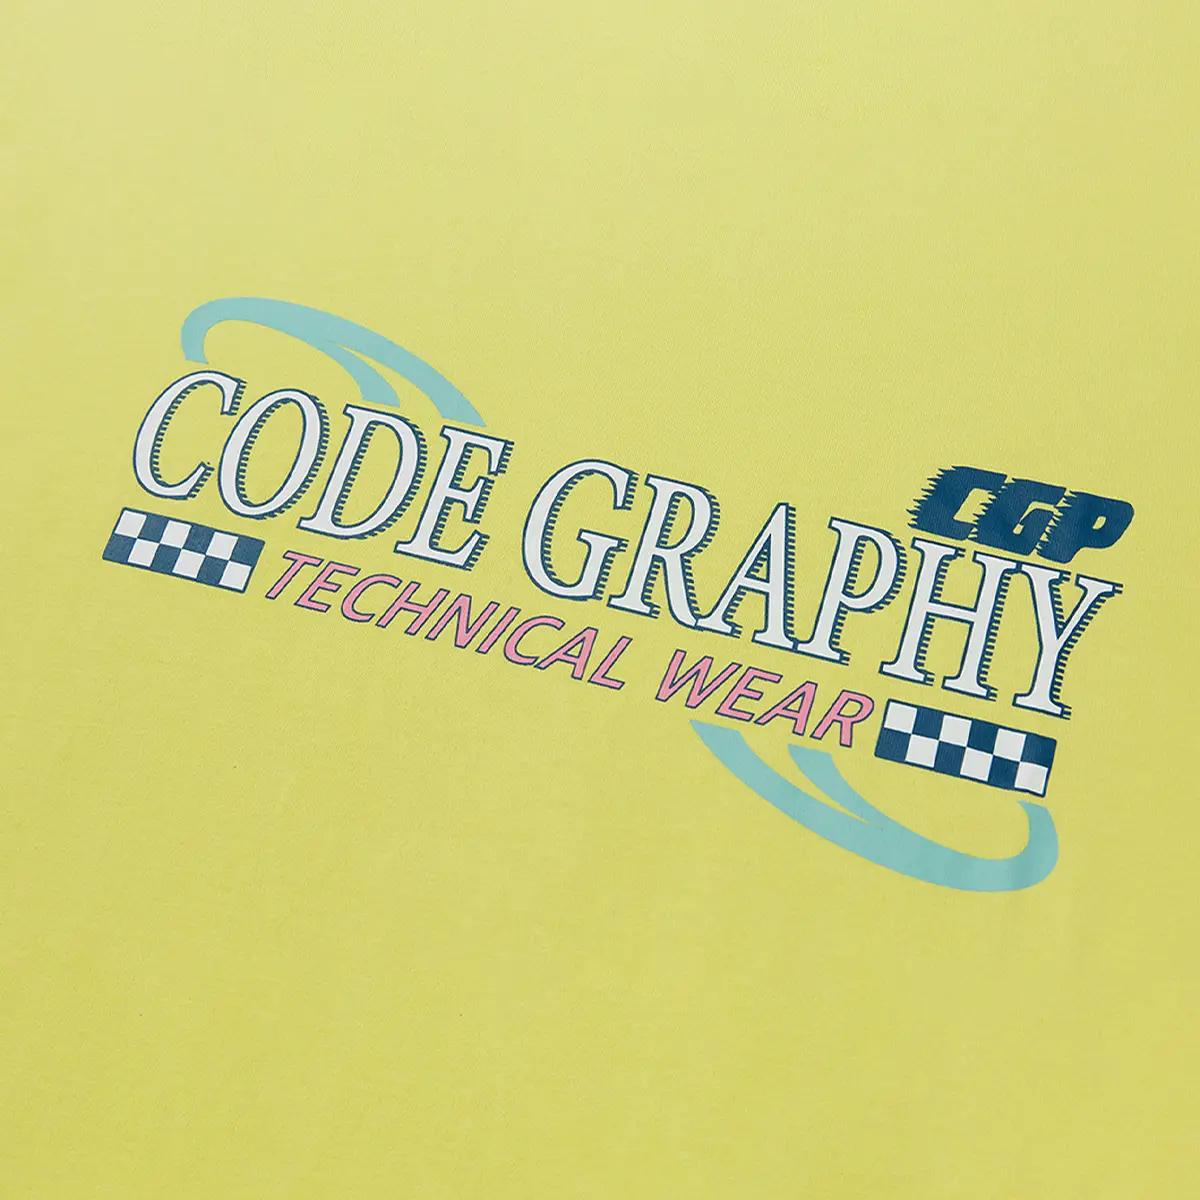 Codegraphy